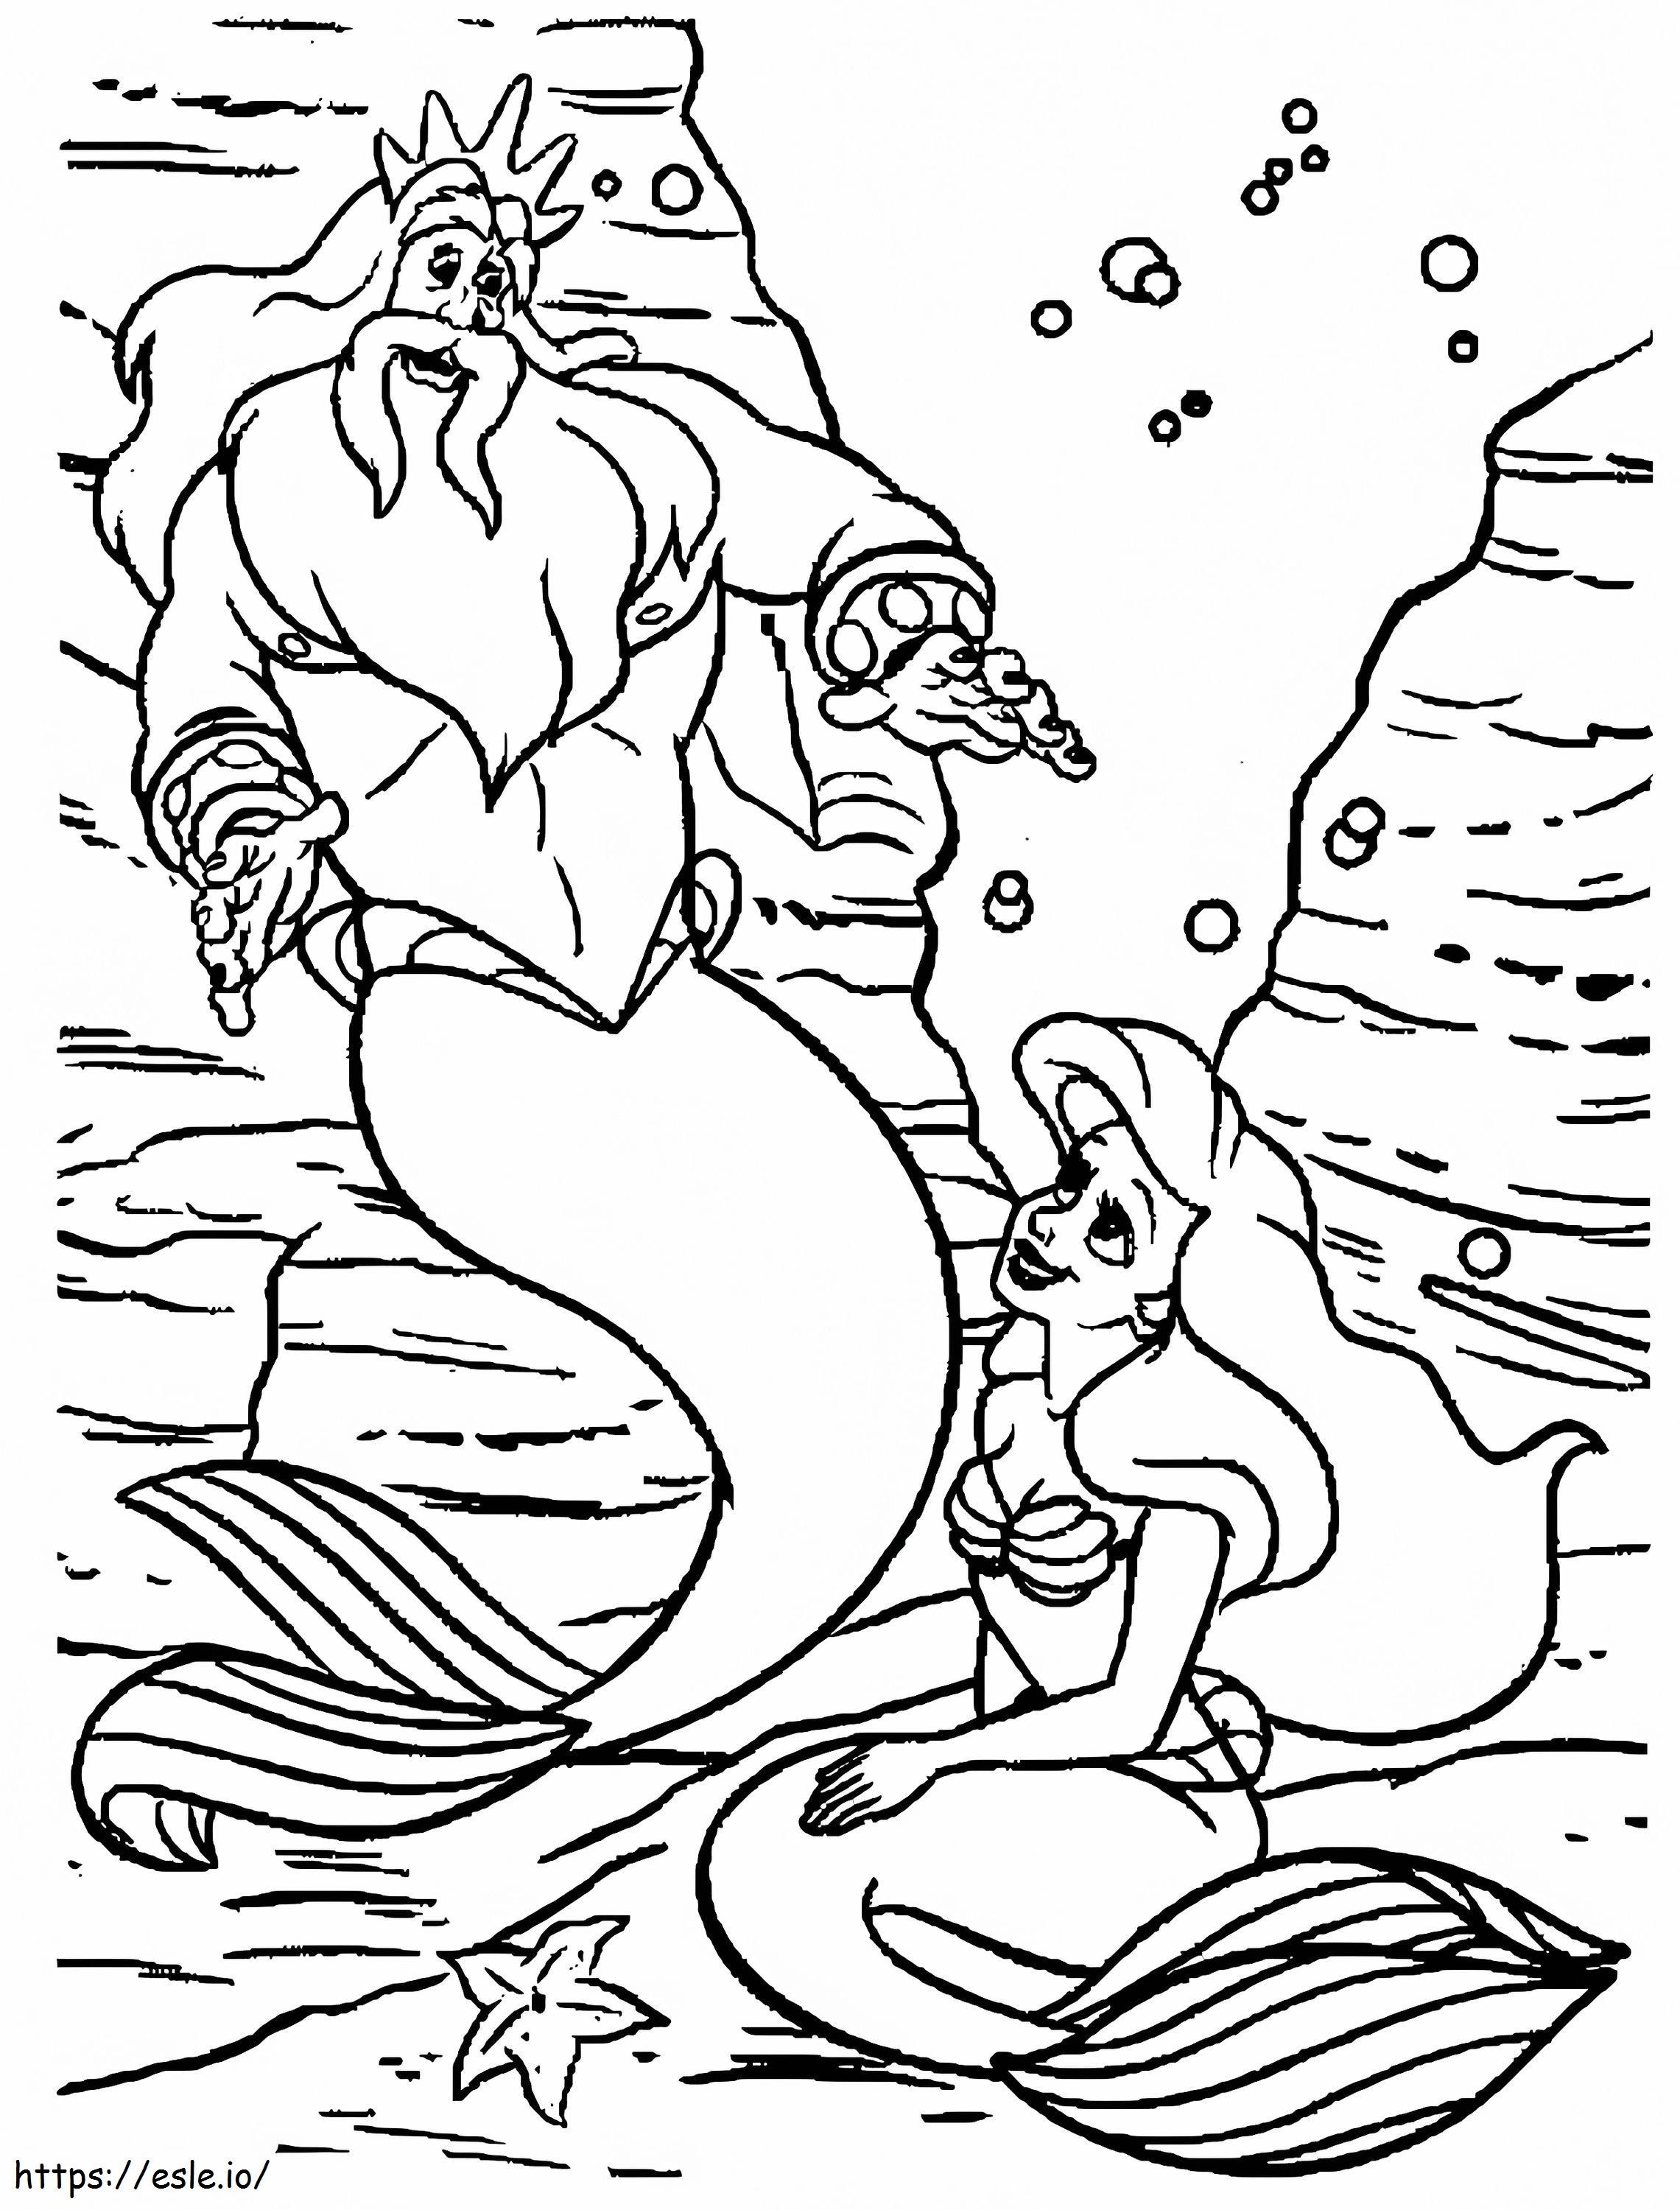 Drawing Mermaid And Father coloring page